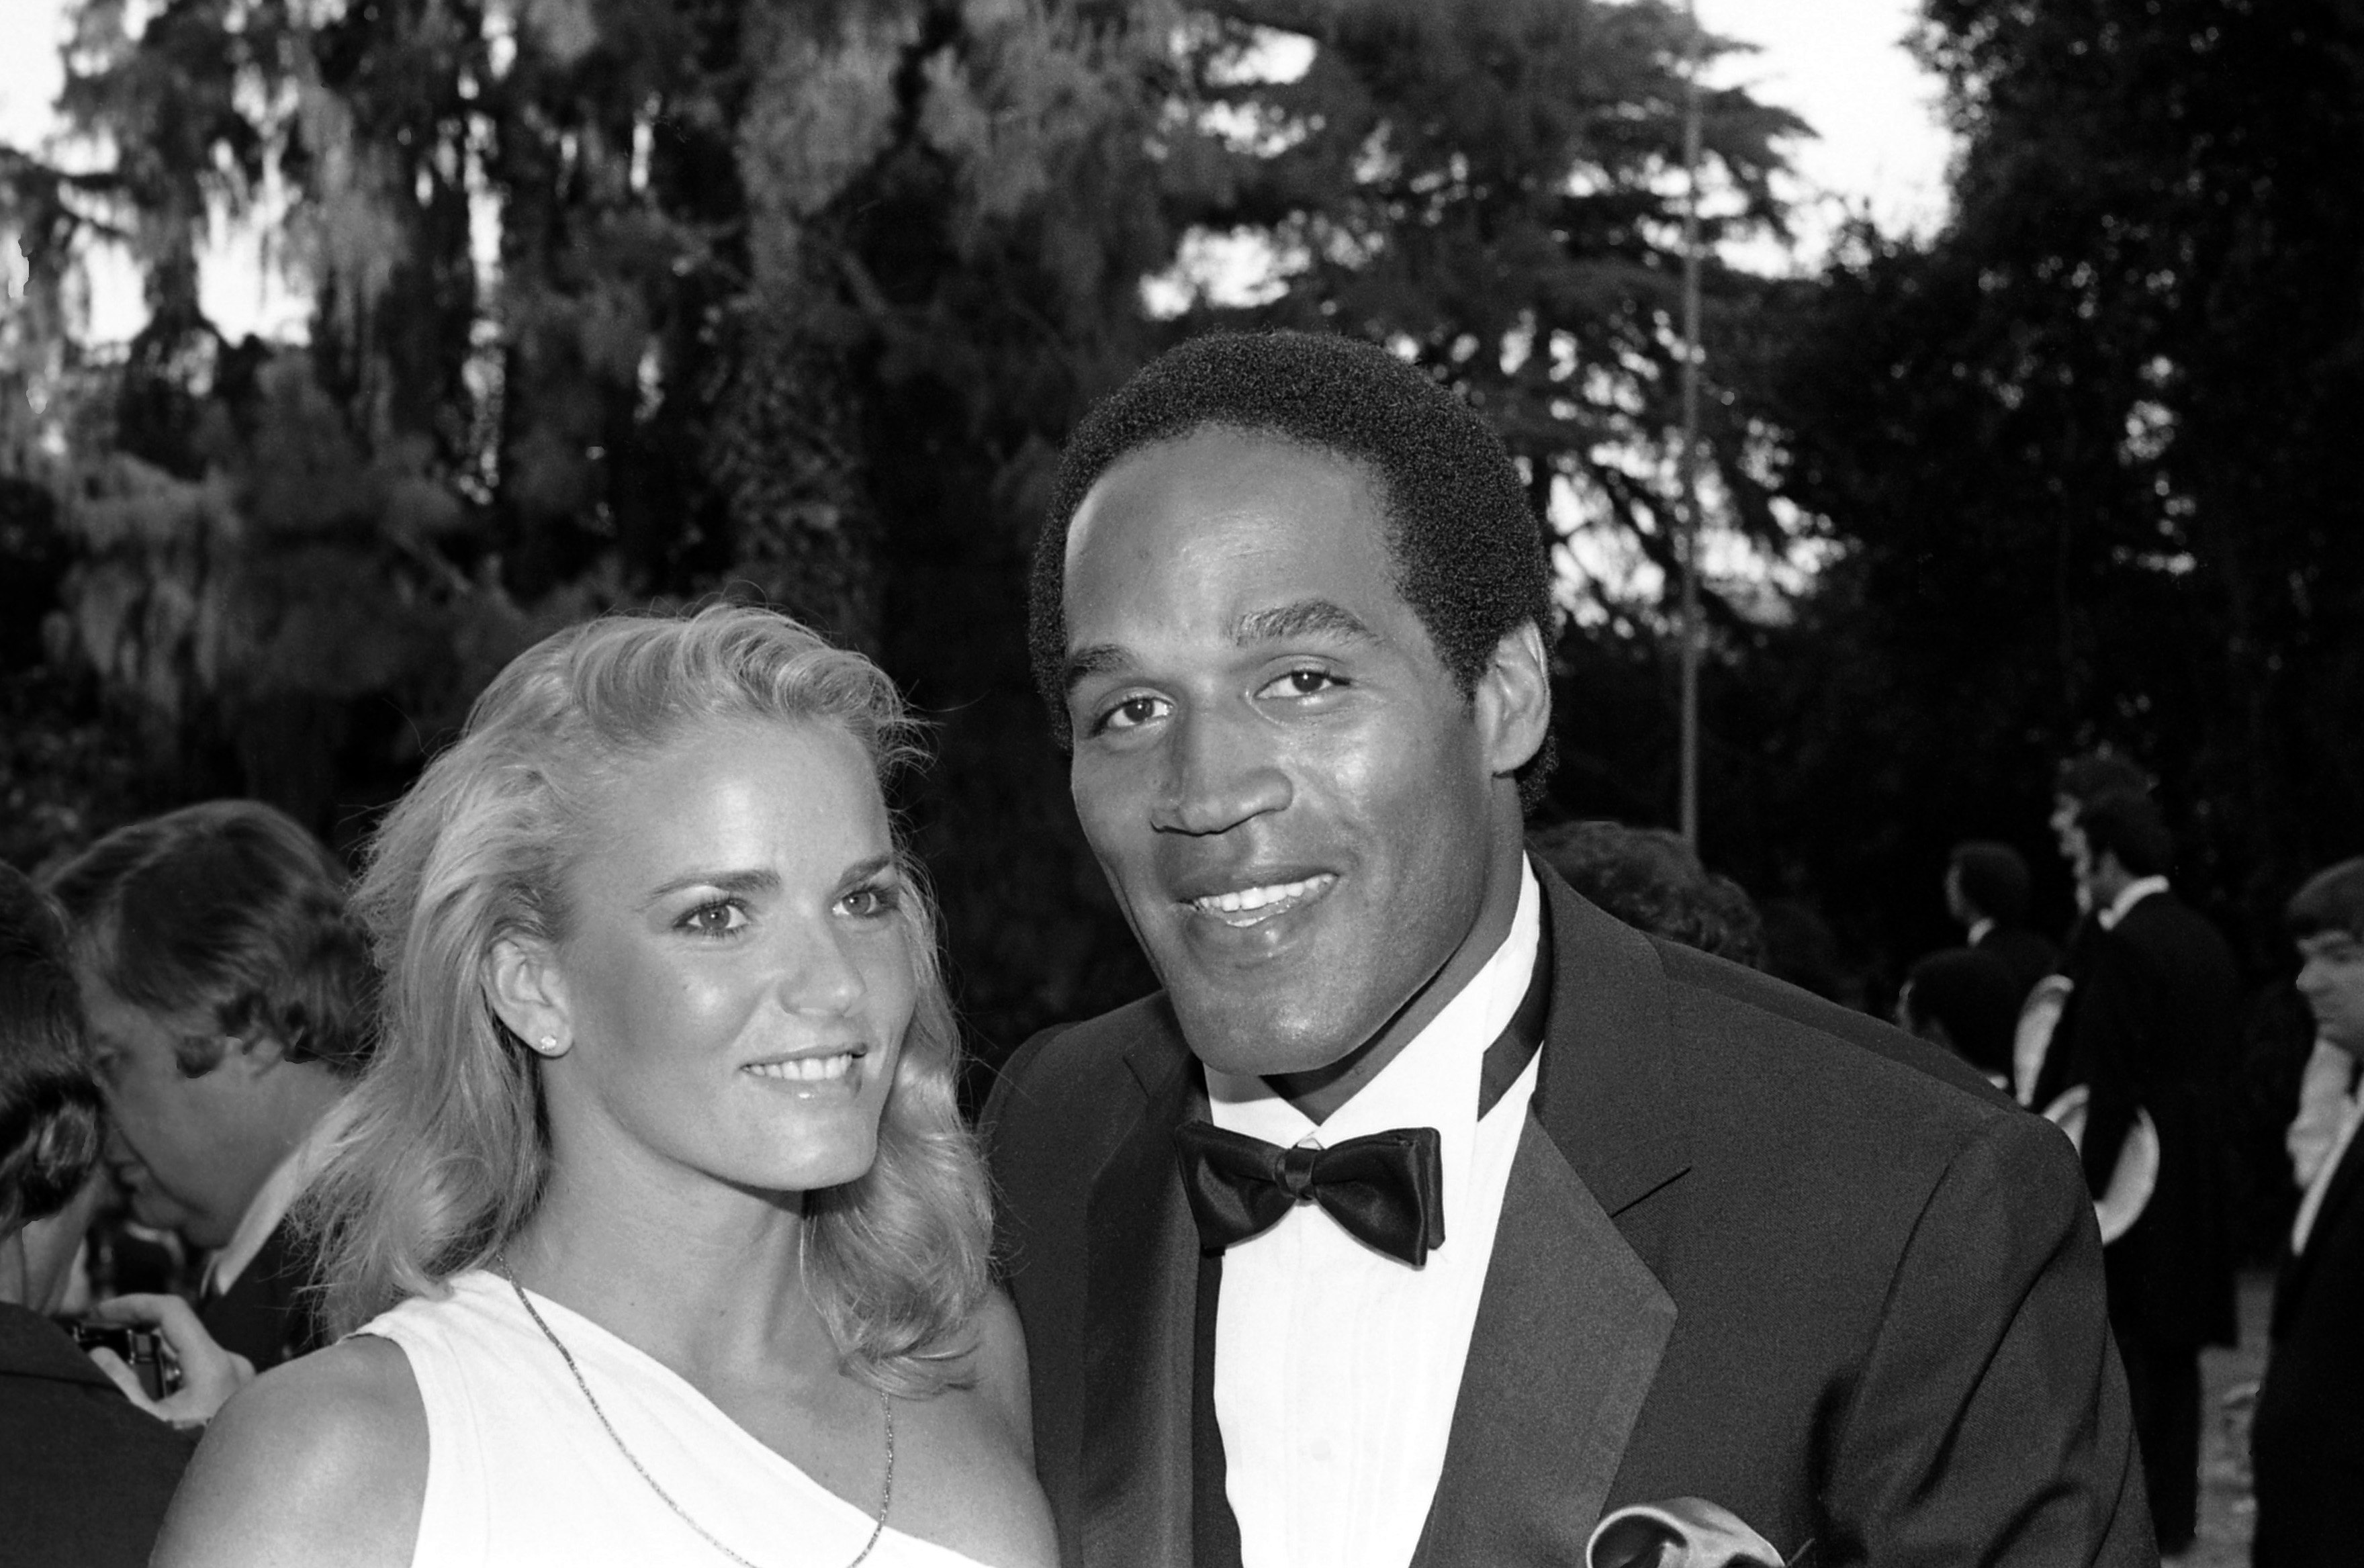 The Bizarre Overlooked Fact About O.J. Simpson and Nicole Brown Simpson’s Relationship